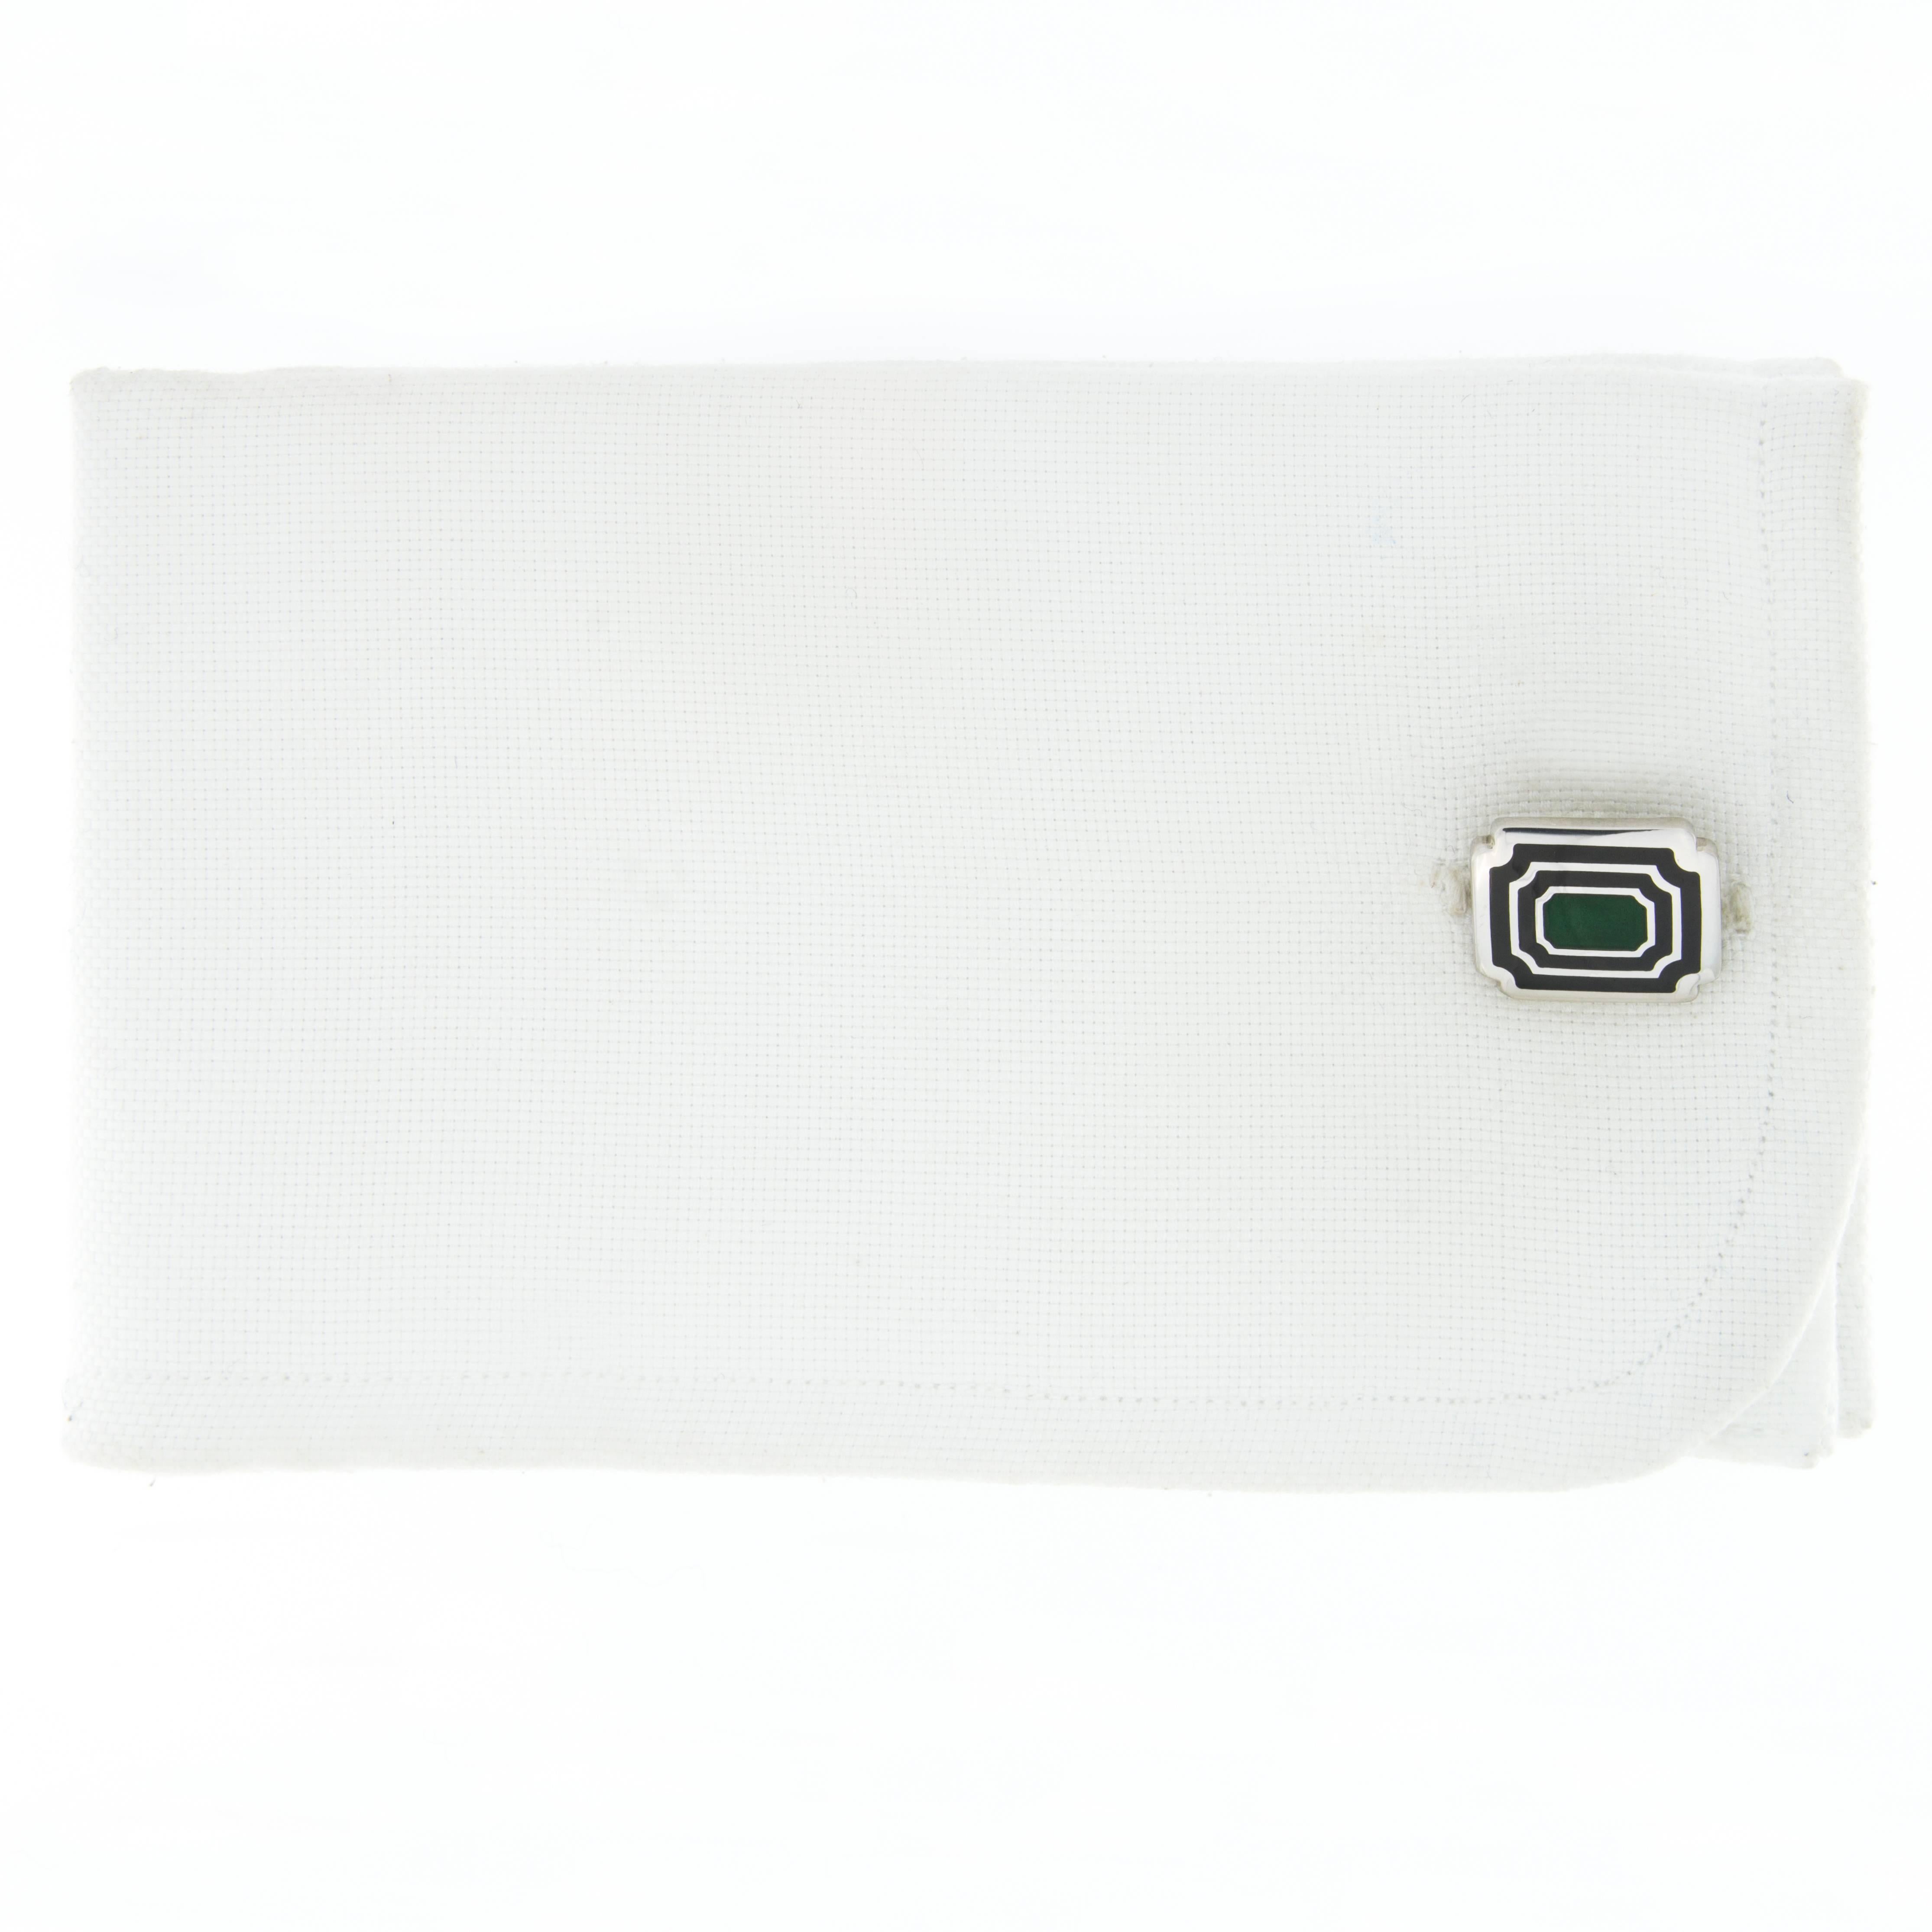 Alex Jona design collection, hand crafted in Italy, rhodium plated Sterling Silver rectangular cufflinks with blue and green enamel. Toggle back.  
Dimensions: 0.58 in. W x 0.52 in. L - 15 mm. W x 13 mm. L

Alex Jona cufflinks stand out, not only